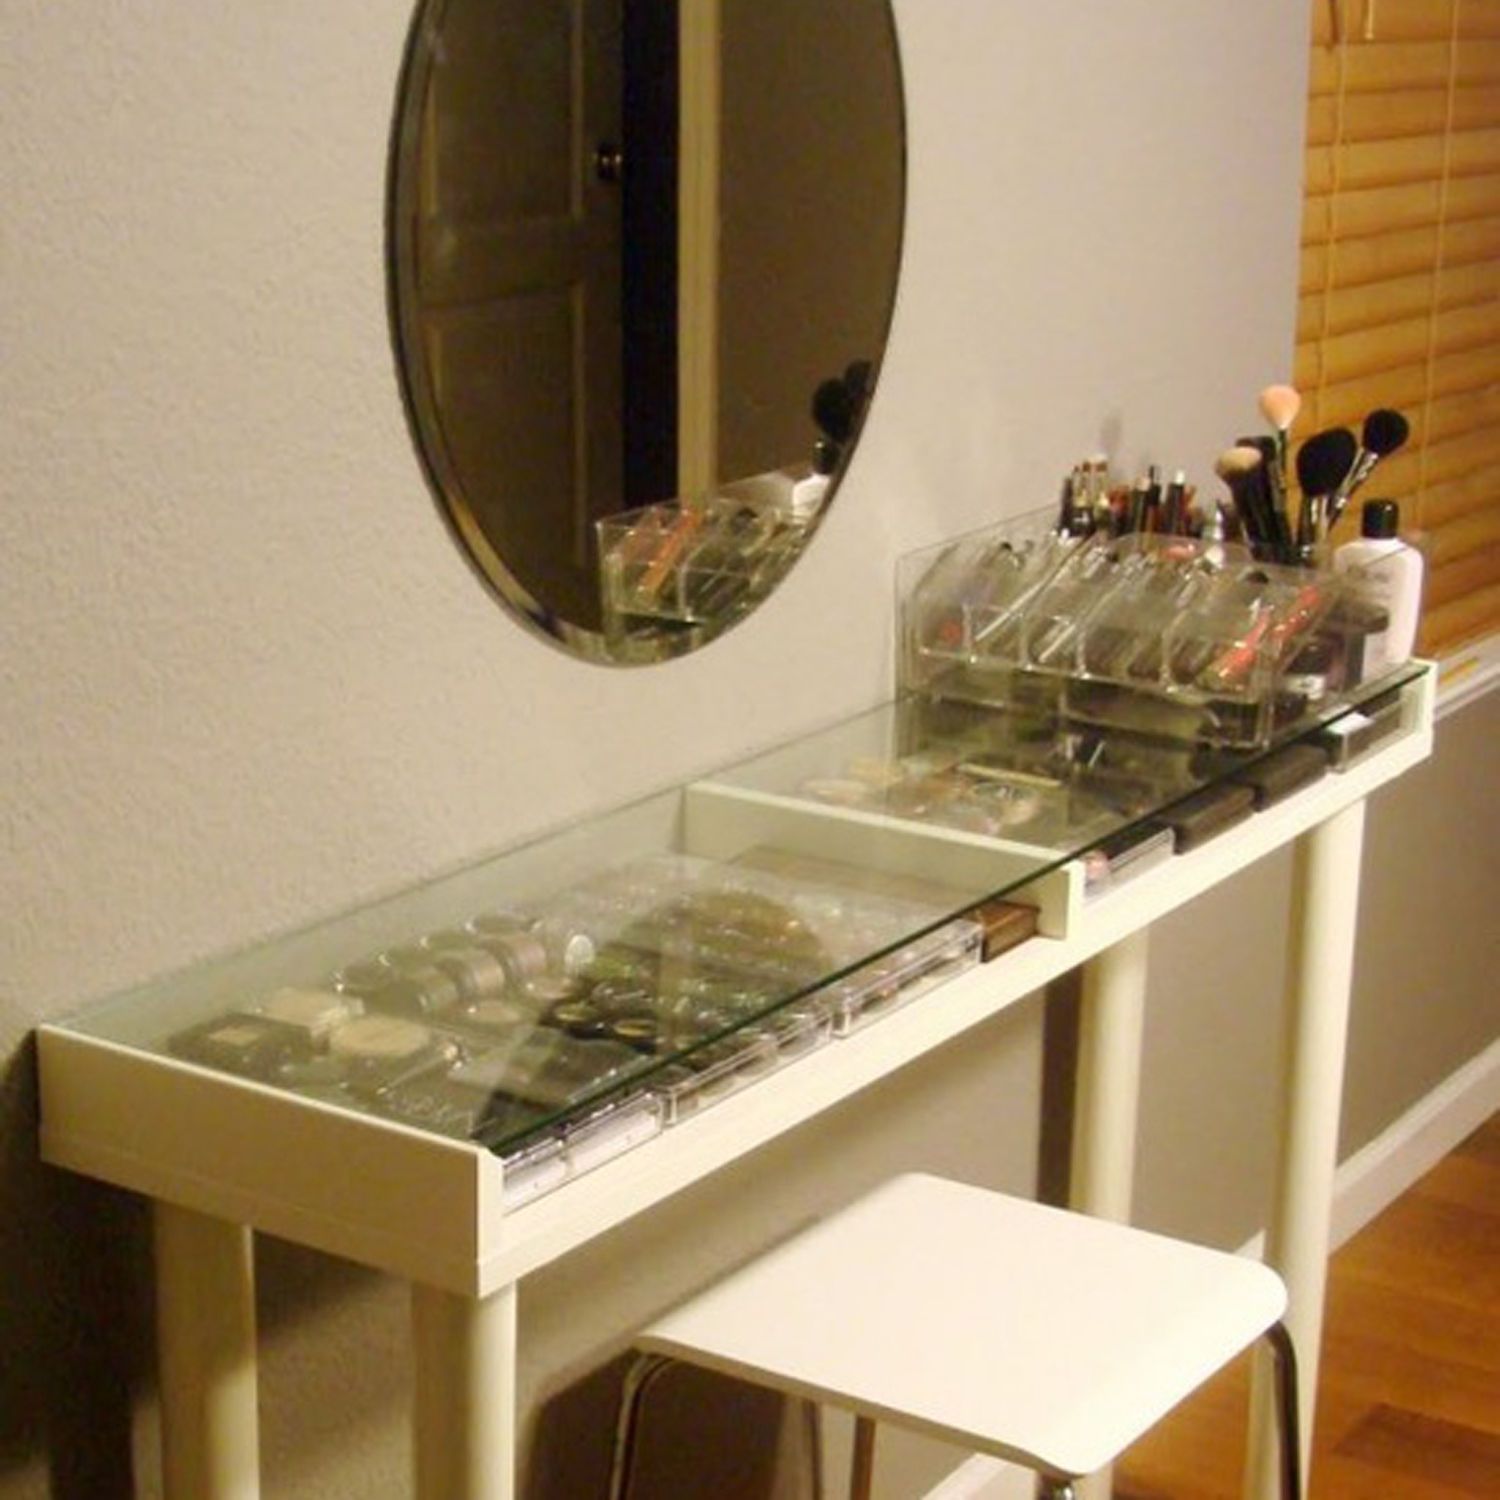 5 Genius DIY Makeup Vanity Ideas Thatll Change Your Life. Yes, Your Entire Life!